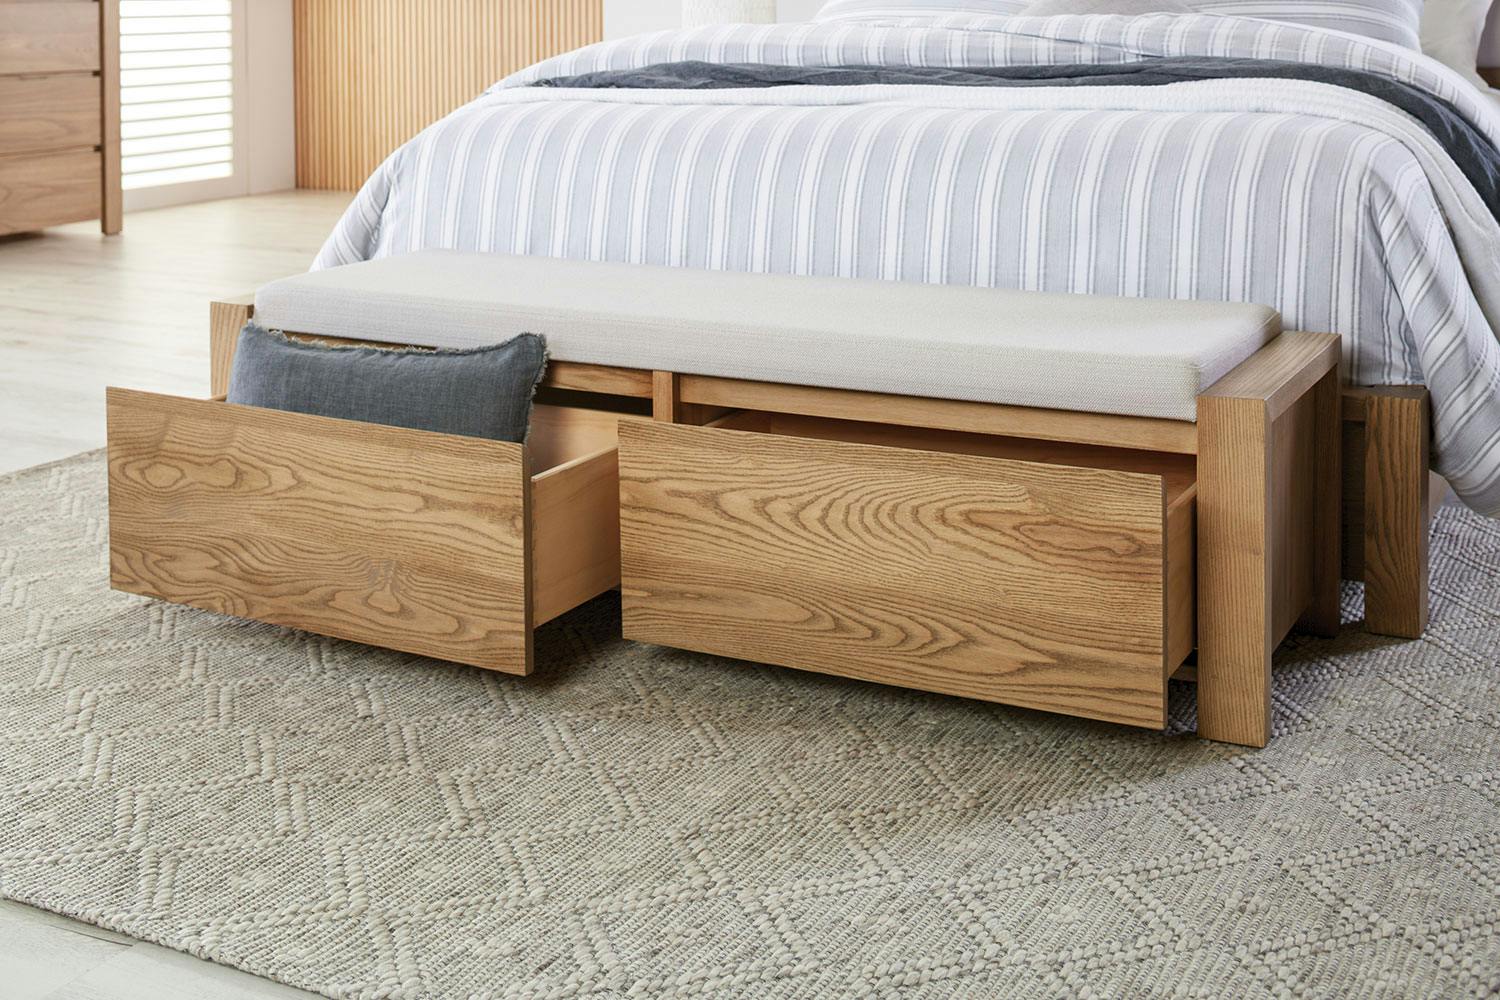 Milford 2 Drawer Bed End Chest by Sorensen Furniture